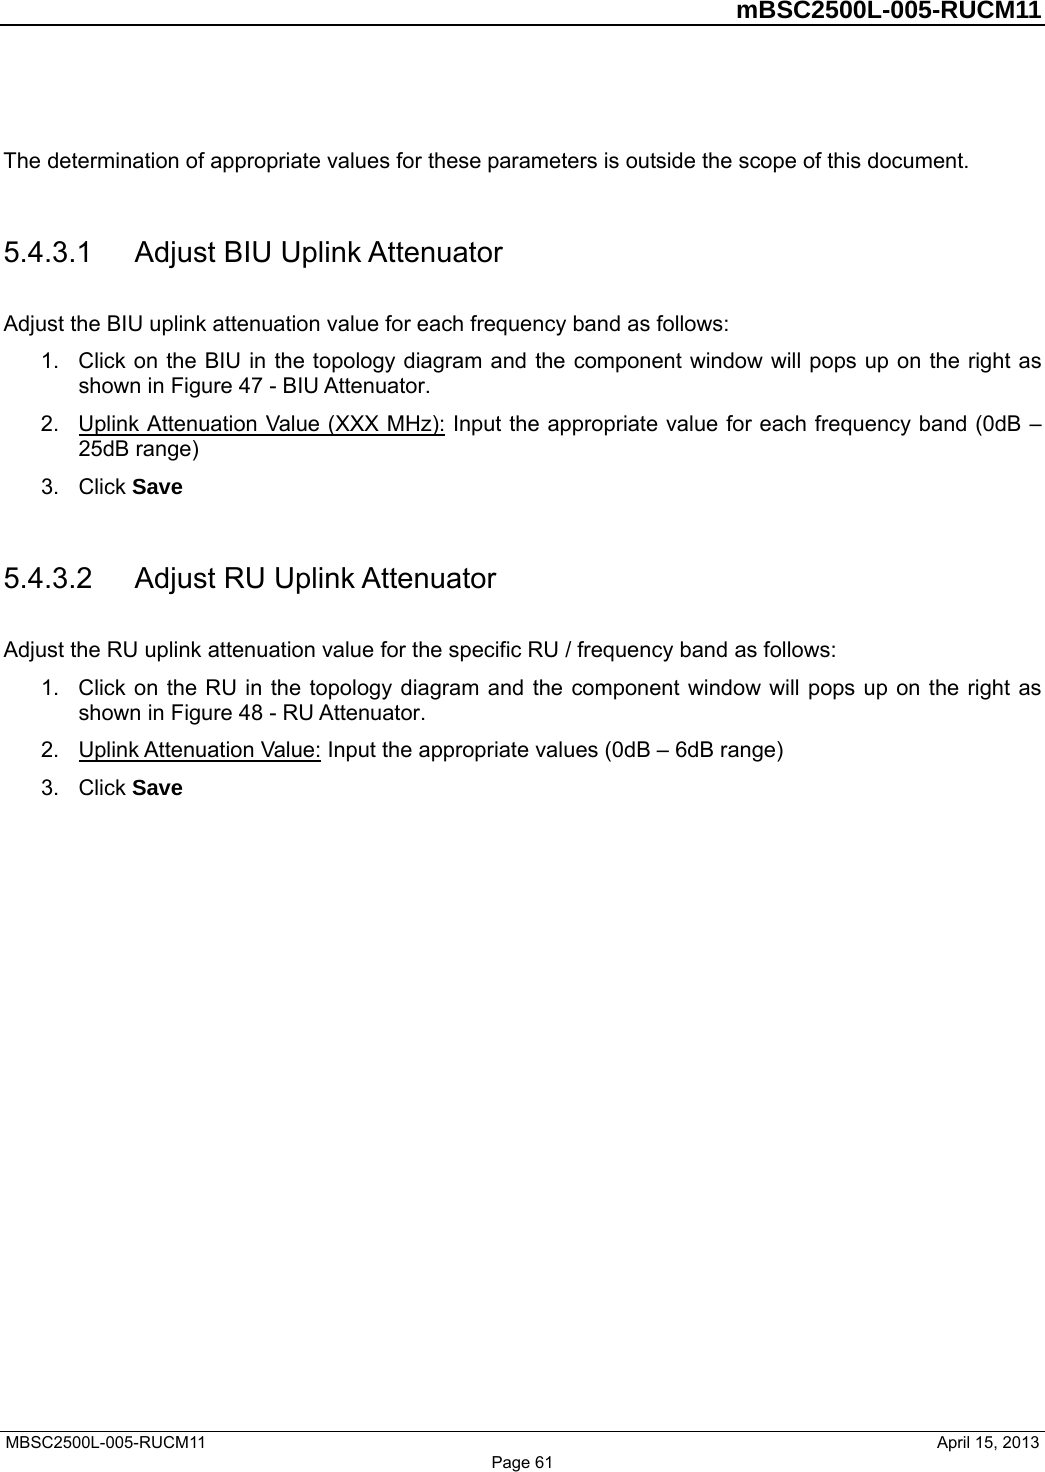         mBSC2500L-005-RUCM11   MBSC2500L-005-RUCM11                                April 15, 2013 Page 61  The determination of appropriate values for these parameters is outside the scope of this document.    5.4.3.1  Adjust BIU Uplink Attenuator Adjust the BIU uplink attenuation value for each frequency band as follows: 1.  Click on the BIU in the topology diagram and the component window will pops up on the right as shown in Figure 47 - BIU Attenuator.  2.  Uplink Attenuation Value (XXX MHz): Input the appropriate value for each frequency band (0dB – 25dB range) 3. Click Save  5.4.3.2  Adjust RU Uplink Attenuator Adjust the RU uplink attenuation value for the specific RU / frequency band as follows: 1.  Click on the RU in the topology diagram and the component window will pops up on the right as shown in Figure 48 - RU Attenuator.  2.  Uplink Attenuation Value: Input the appropriate values (0dB – 6dB range) 3. Click Save  